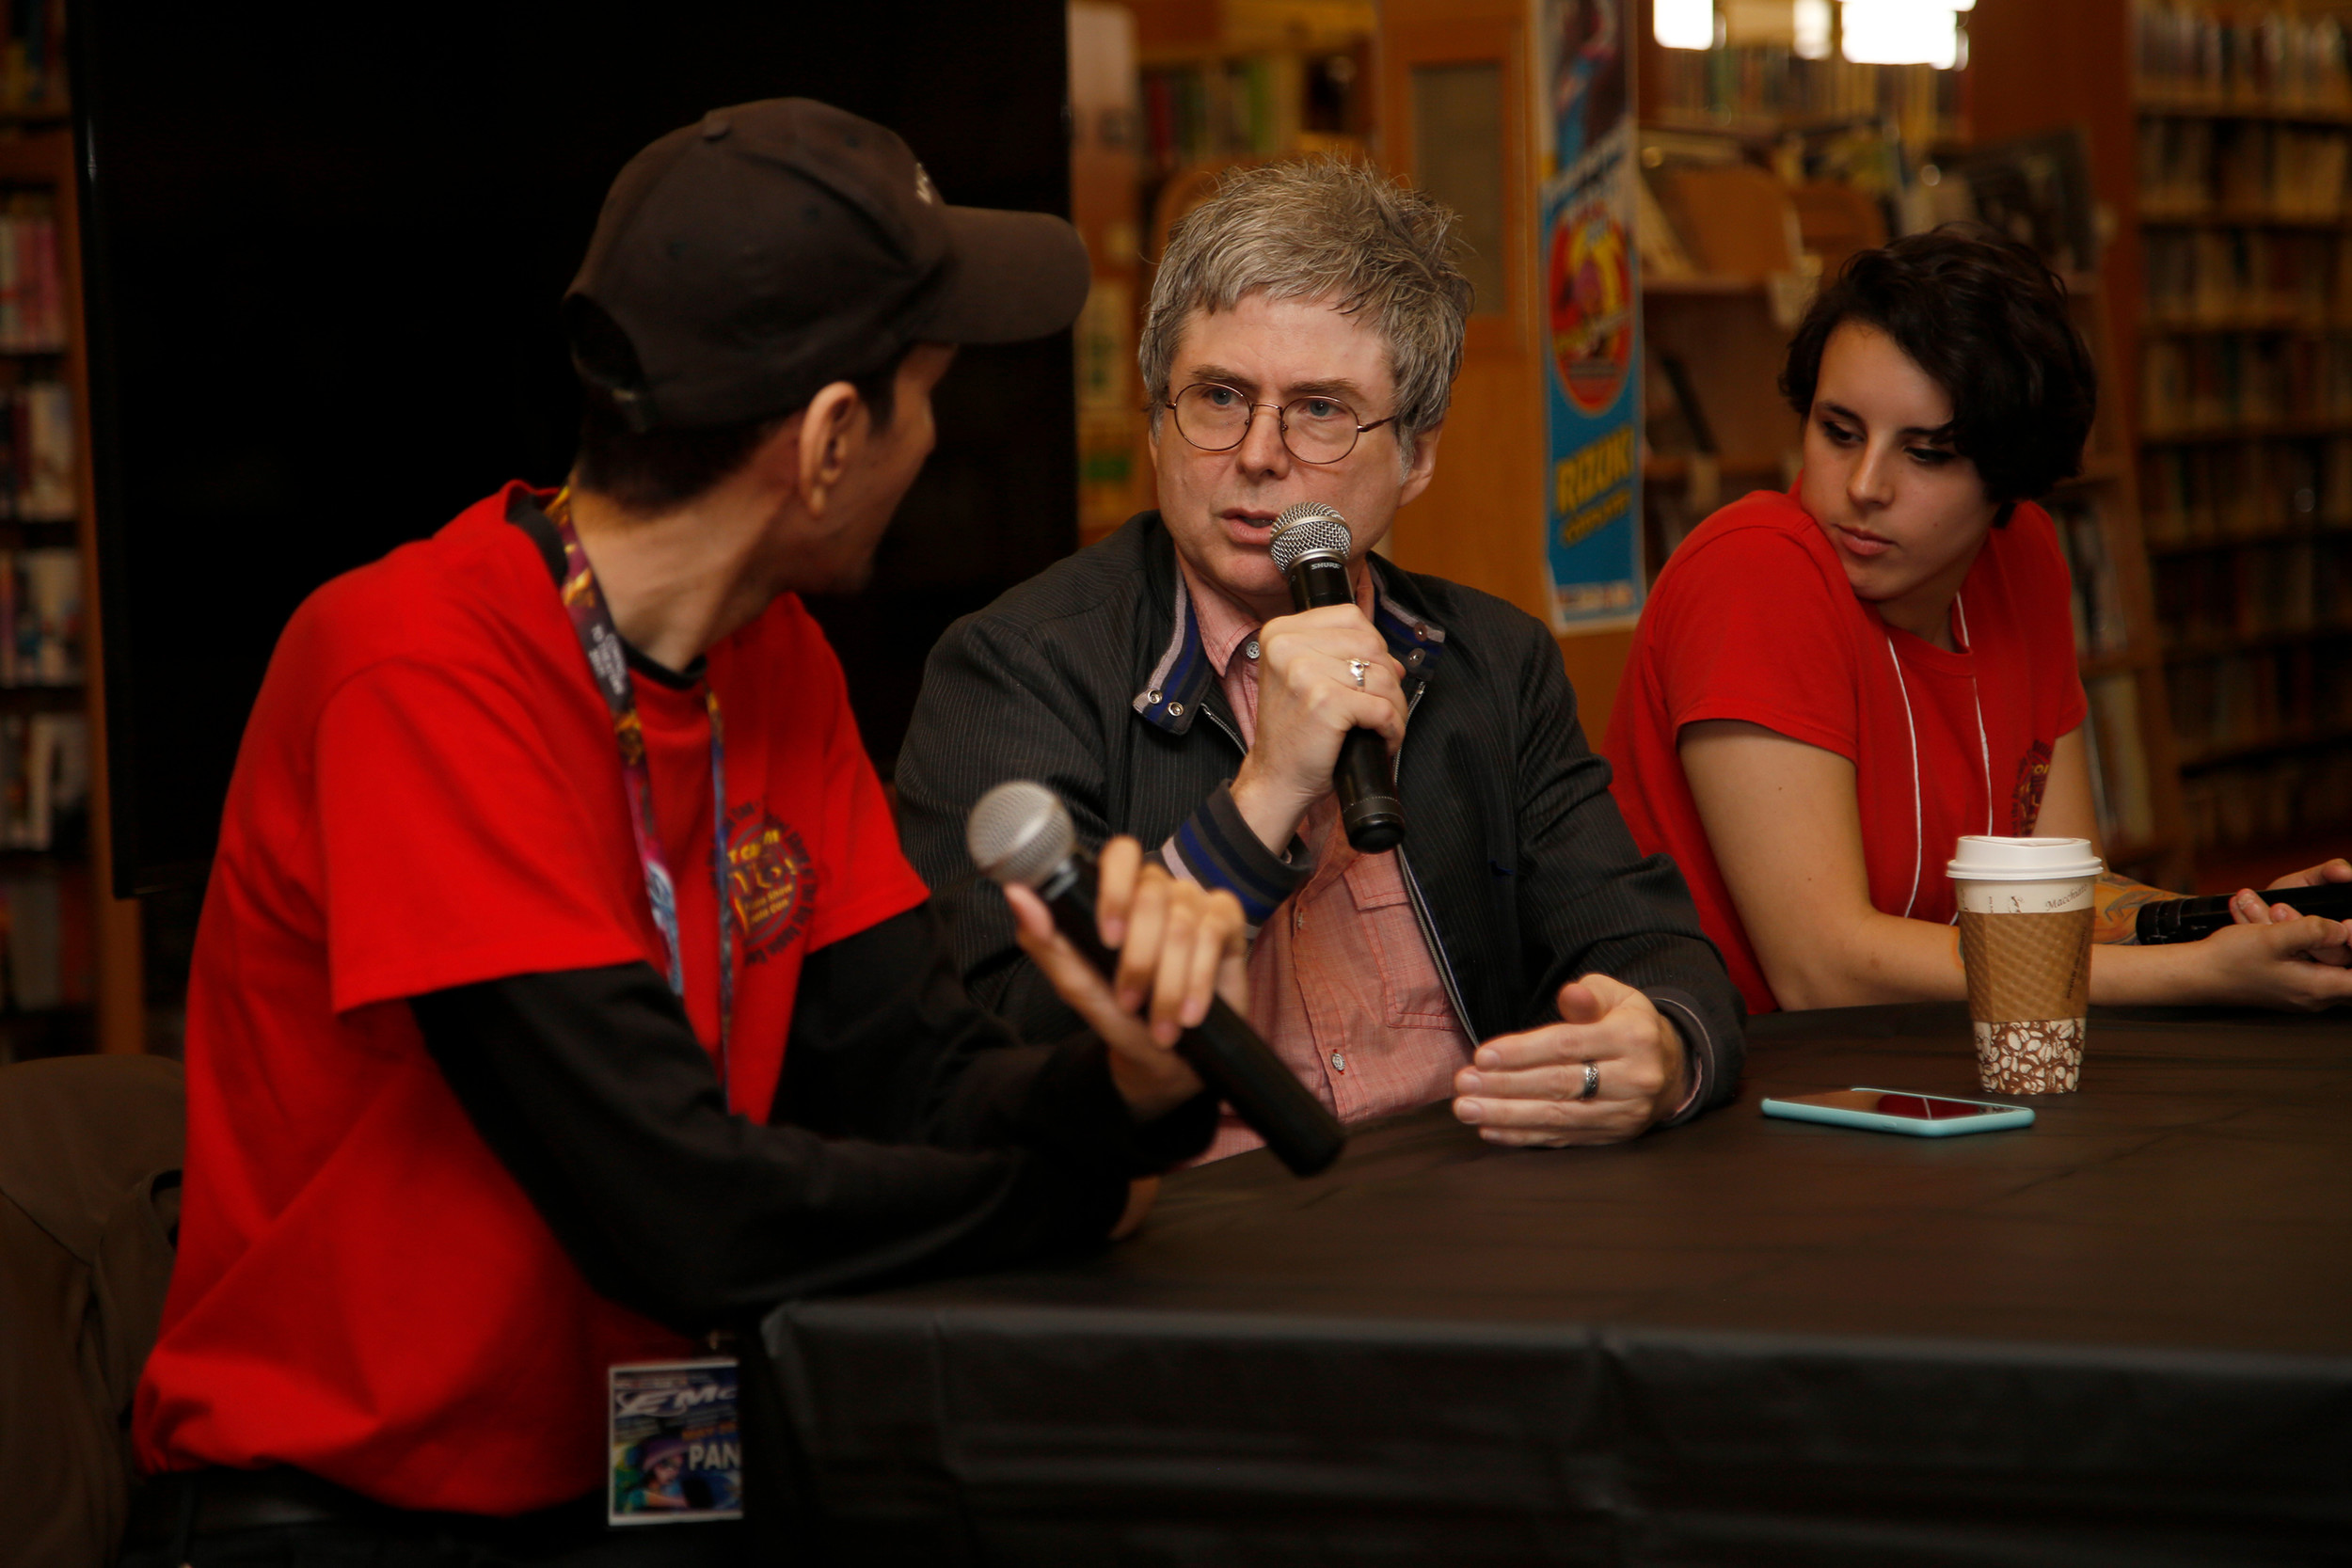 Voice actor Quinton Flynn, center, answered questions from audience member during a panel session hosted at the East Meadow Public Library, as part of the library’s 7th annual EMCon Animefest.